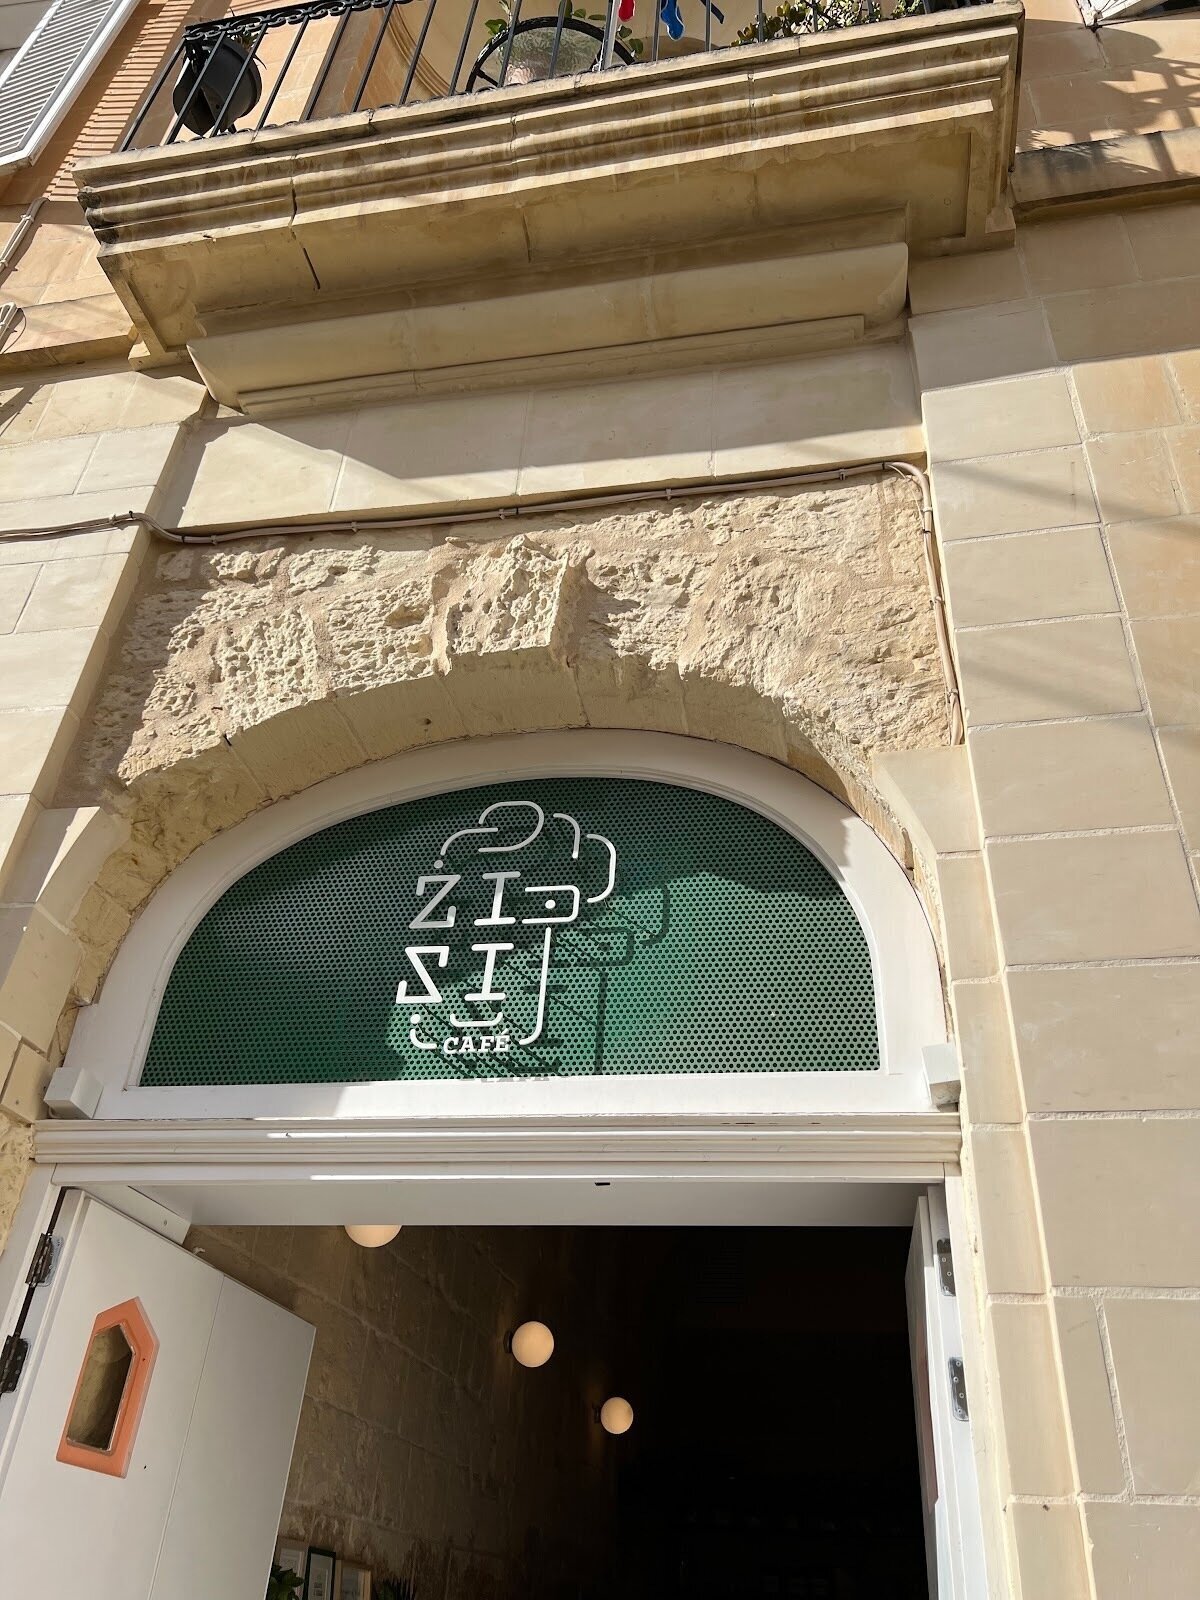 <span class="translation_missing" title="translation missing: en.meta.location_title, location_name: Zizi cafe, city: Malta">Location Title</span>